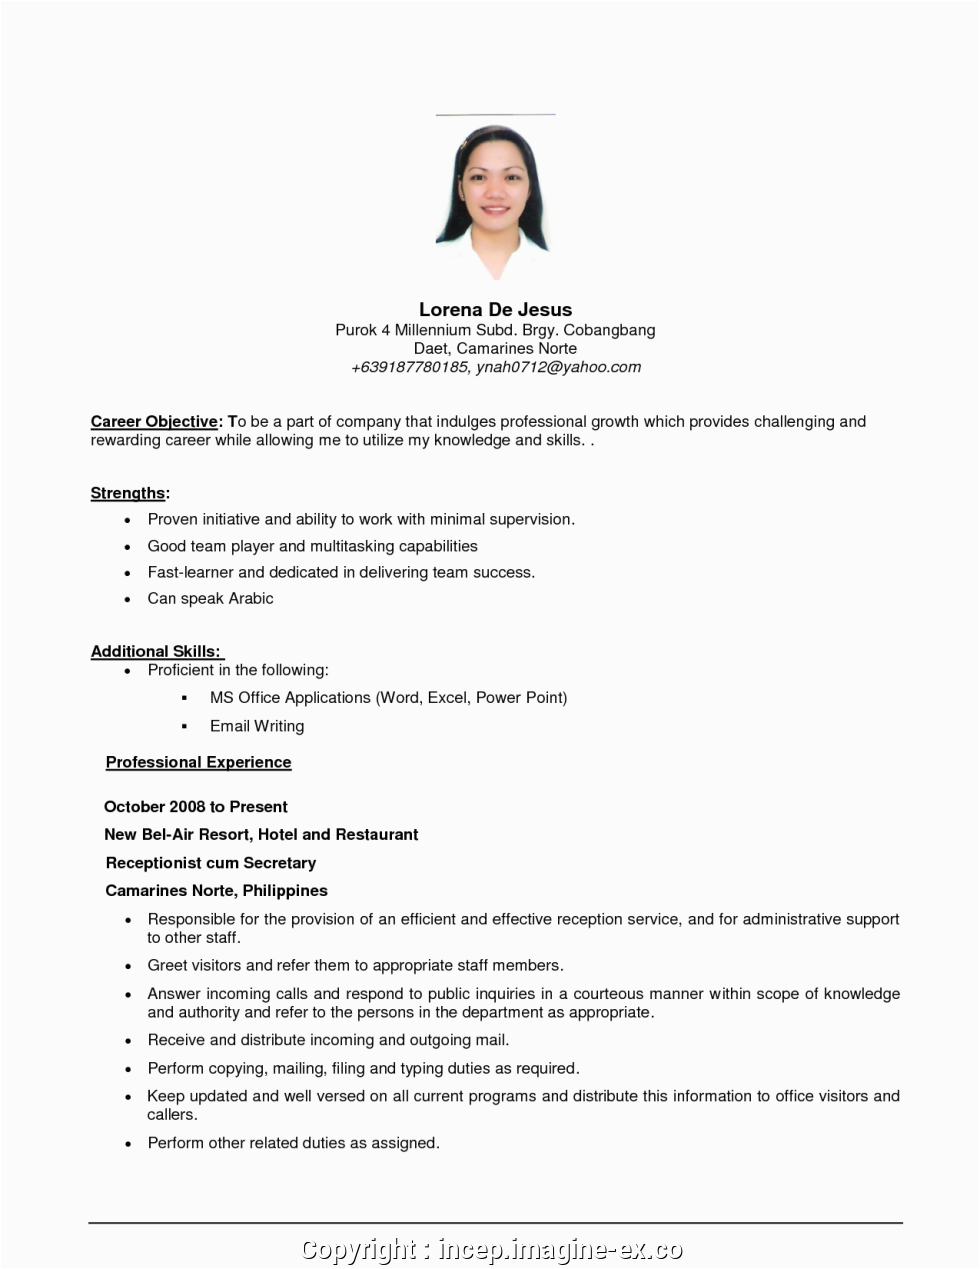 Sample Resume Objective for Any Position Best Sample Objective In Resume for Any Position Objective